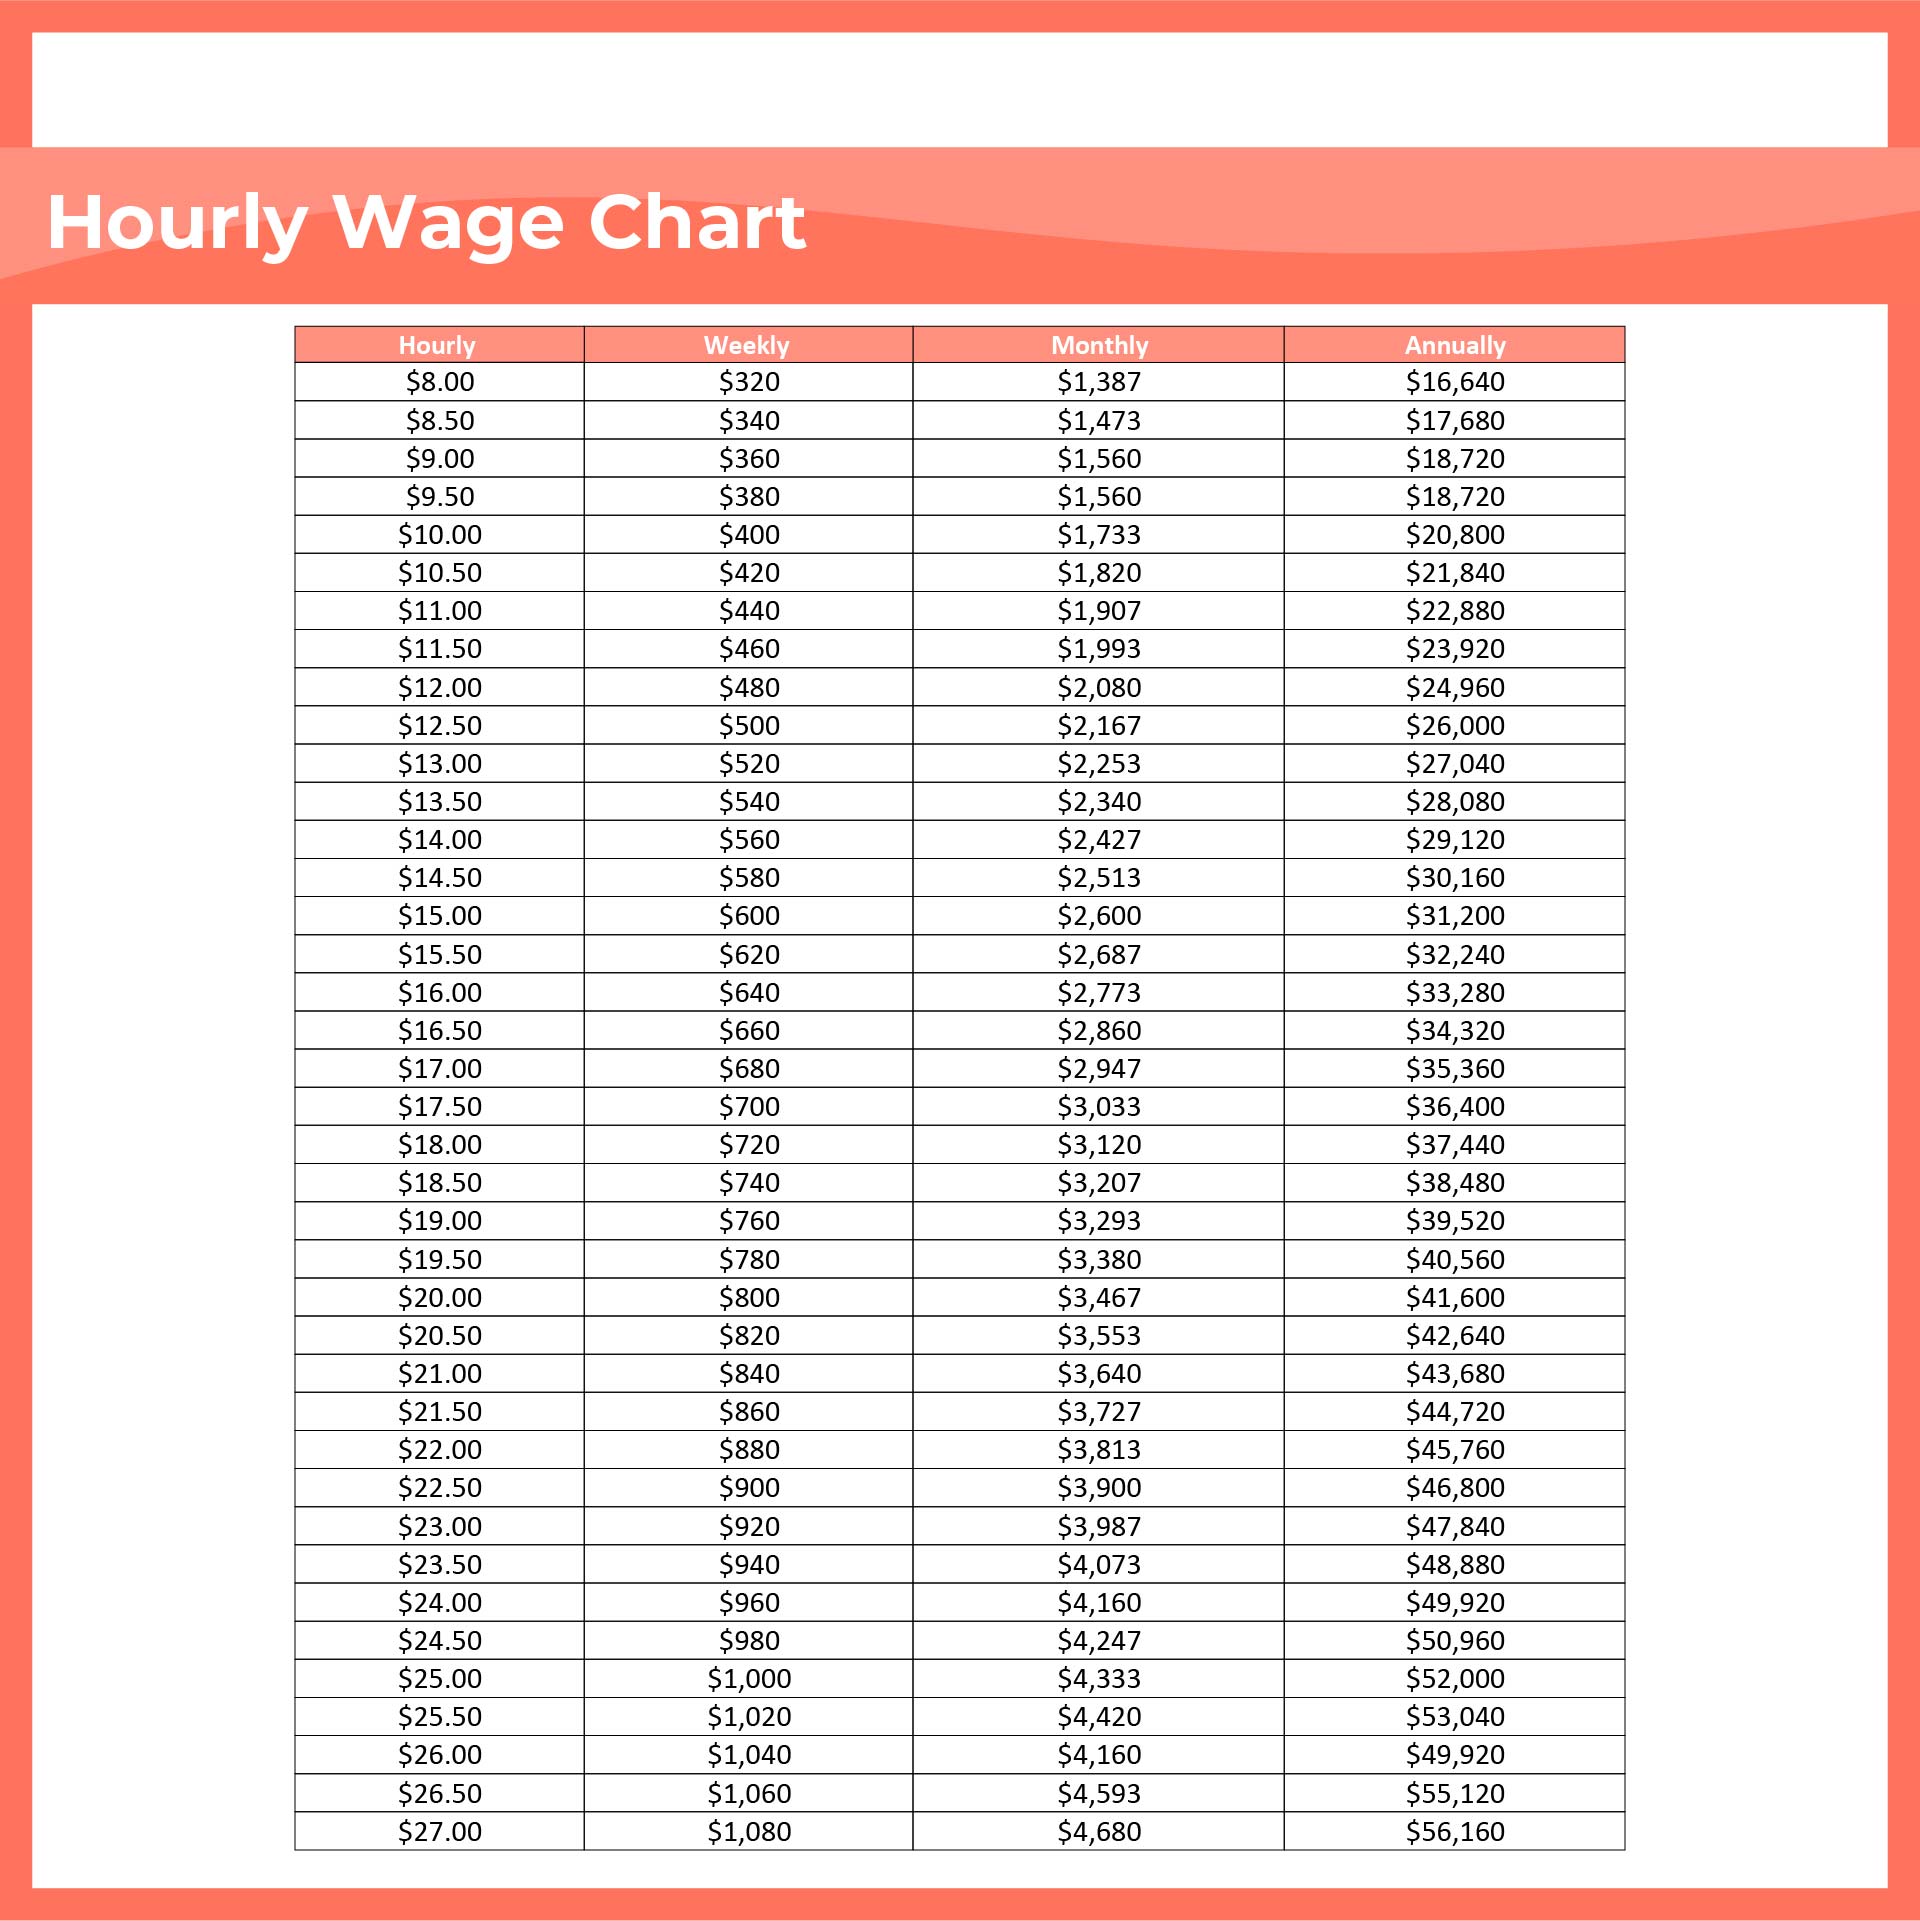 salary-to-hourly-pay-wage-conversion-calculator-allonmacauley